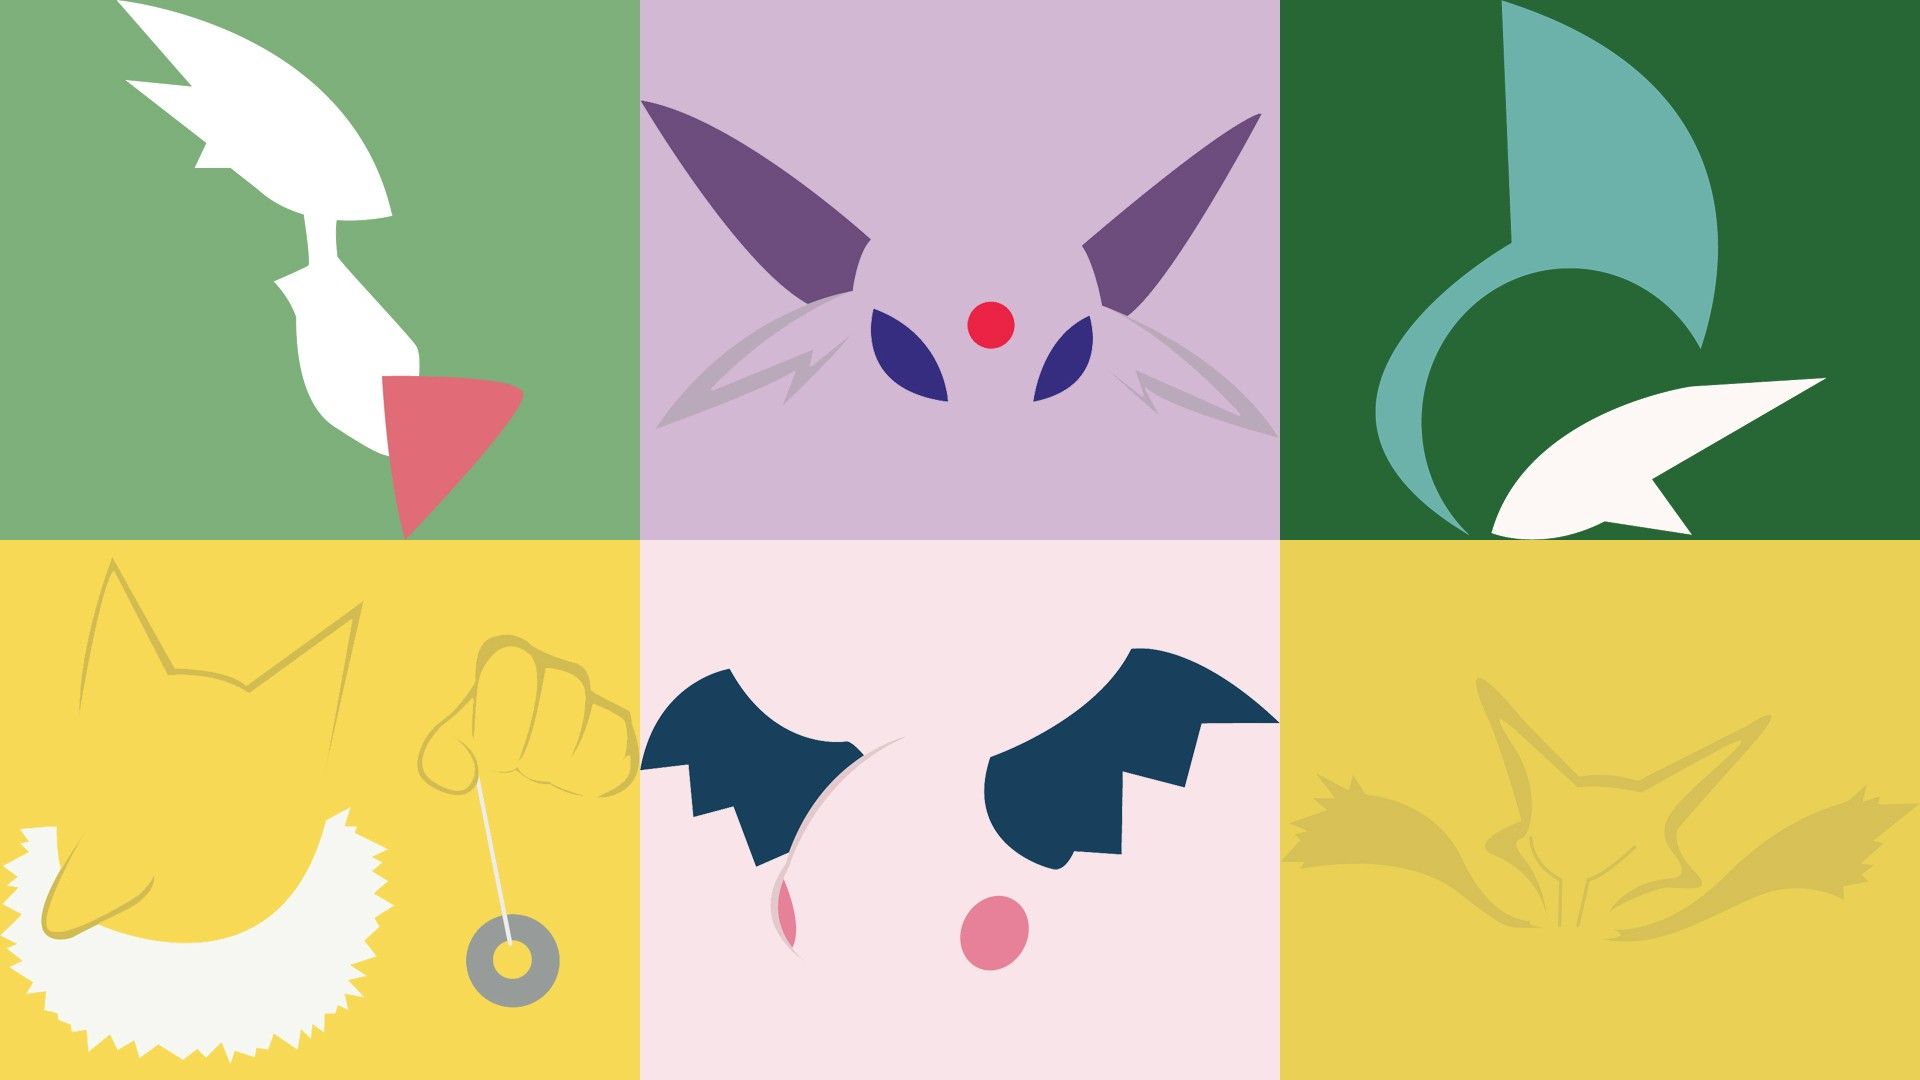 Ragercreeper's All Psychic Type Pokemon Wallpaper. These Image